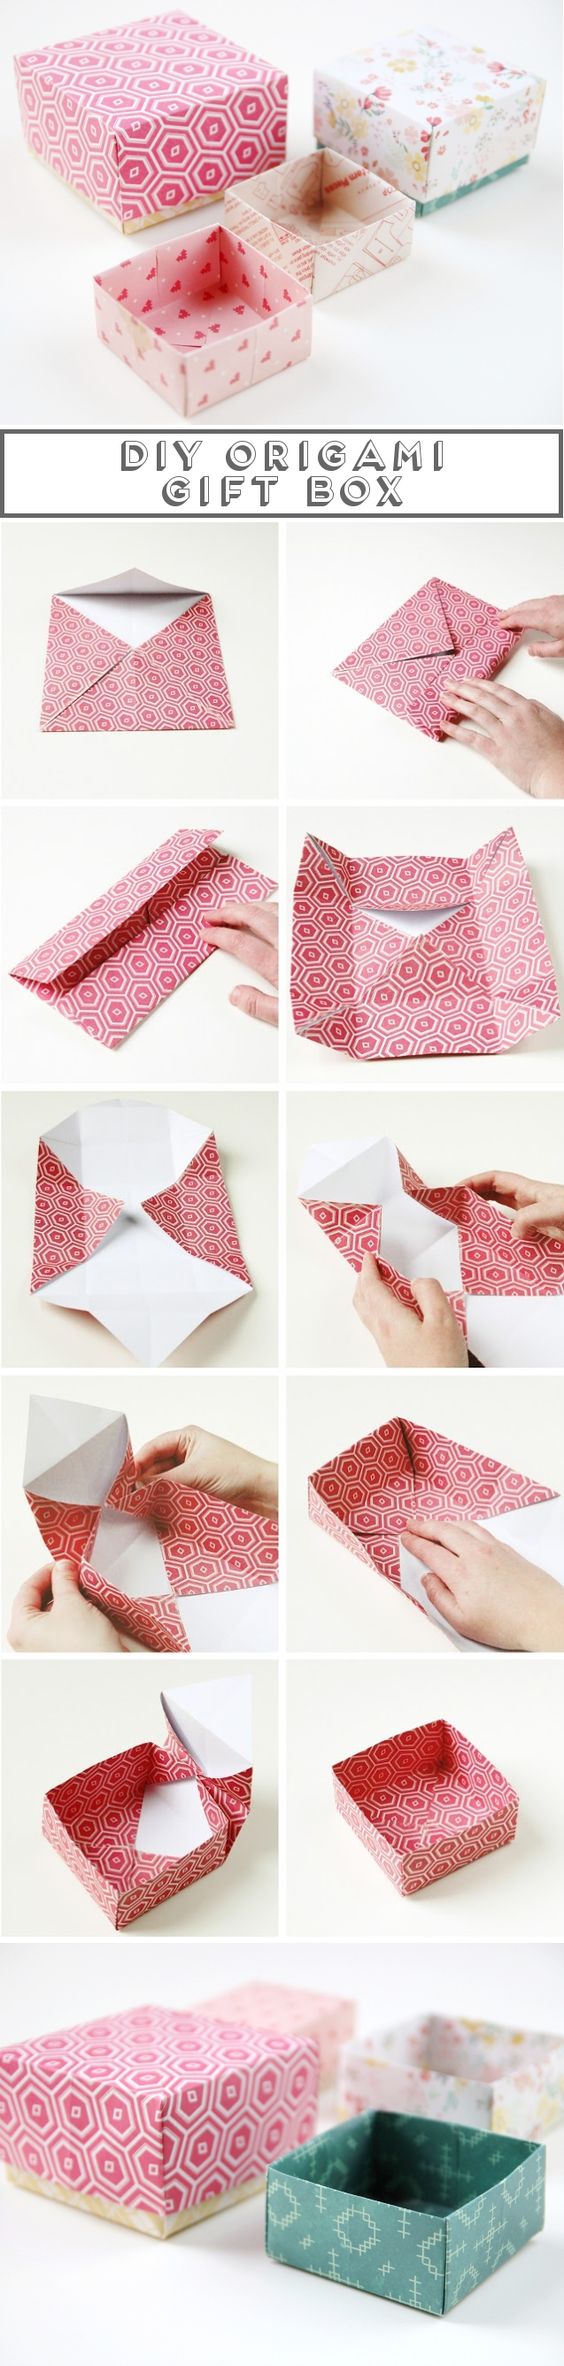 15 DIY Tutorials for Making Gift Wrappers Pretty Designs